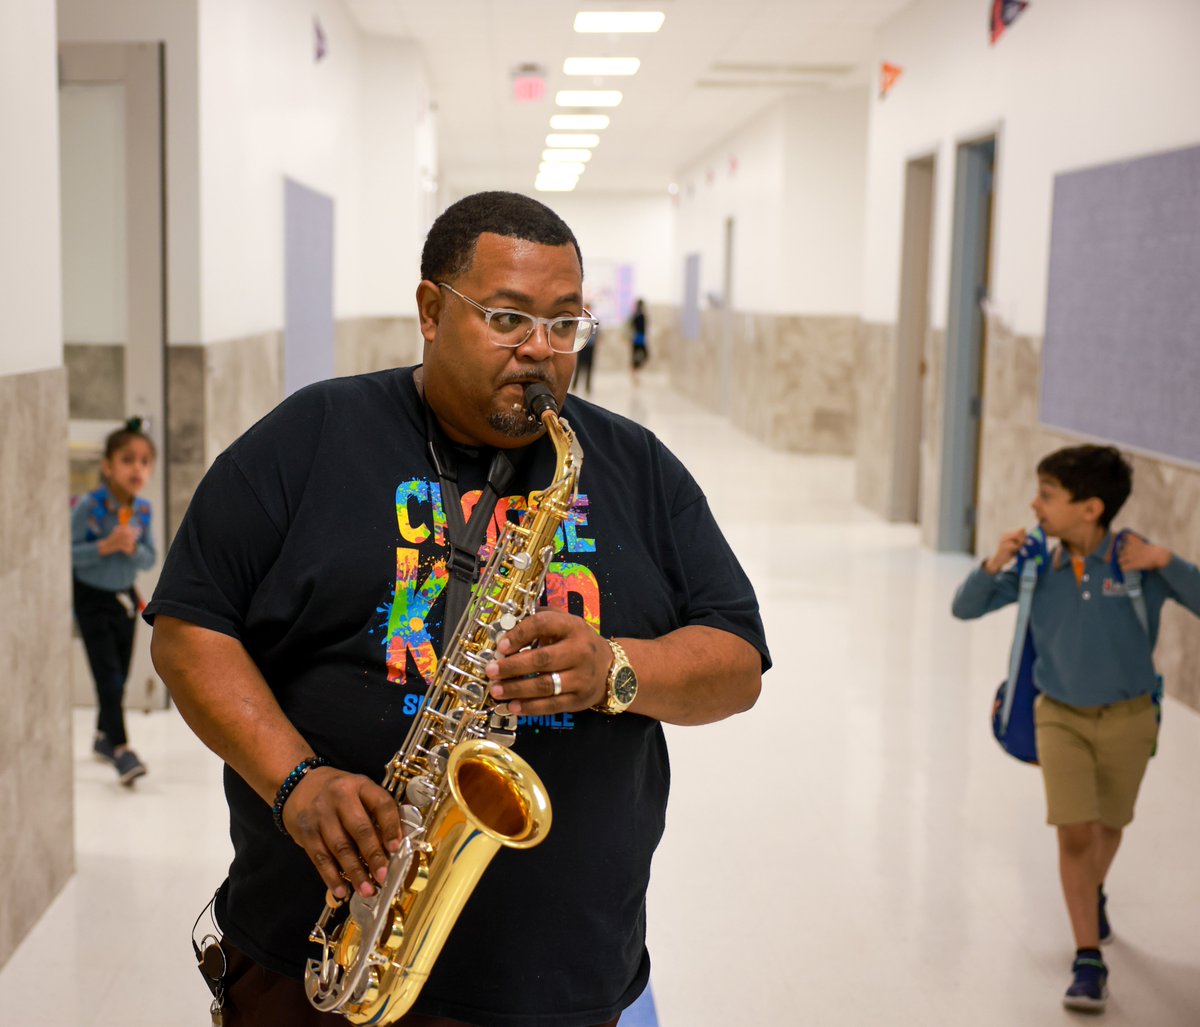 Mr. Buyckes, the music teacher at Harmony Science Academy-Cypress, gets the students dancing in the mornings with his saxophone playing as they arrive for another day of school.🎵🎶🎷